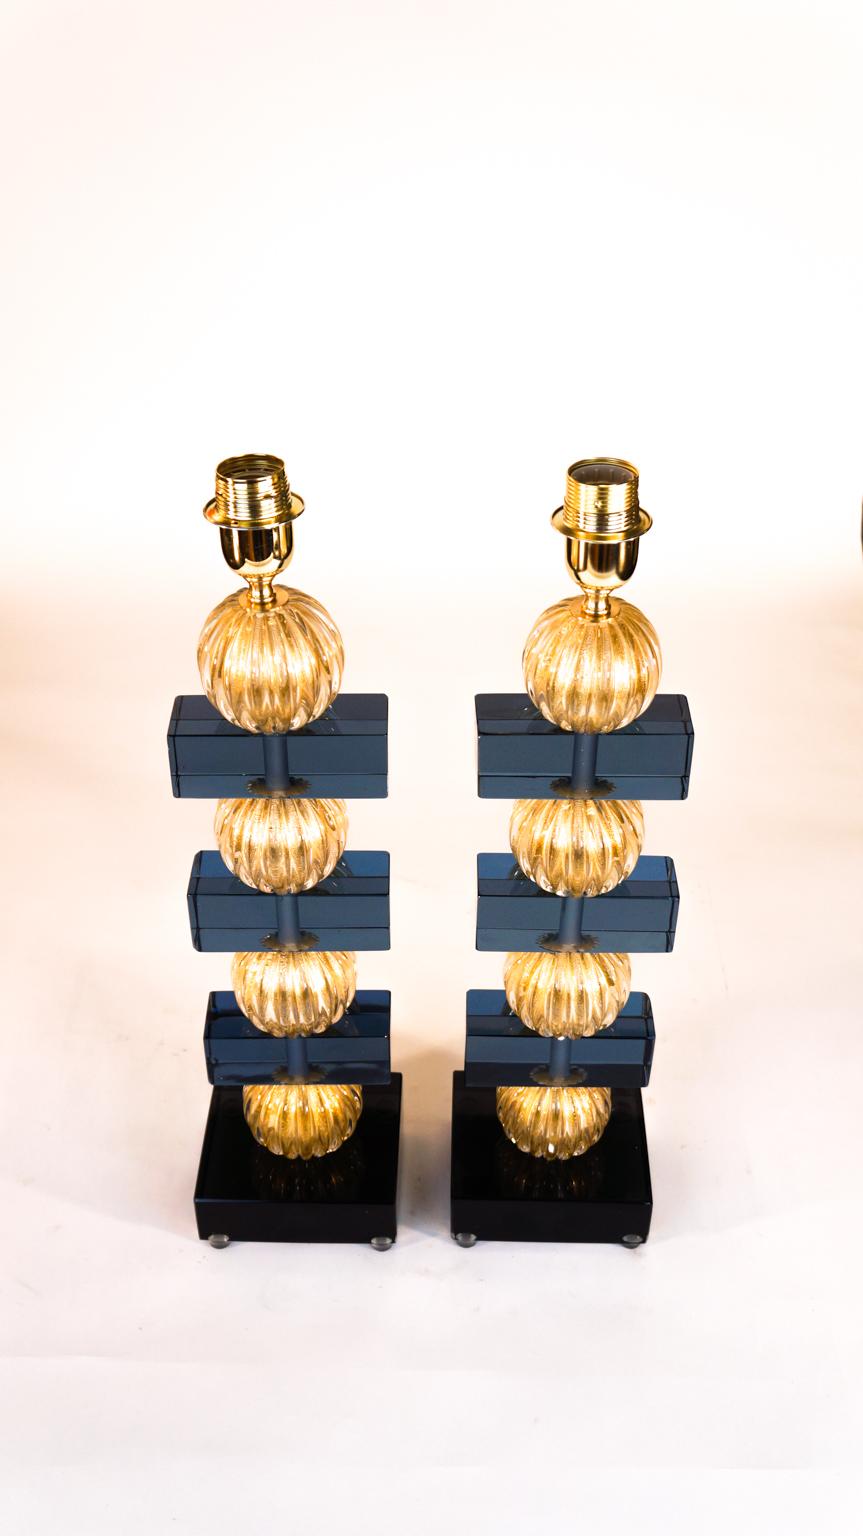 Italian Alberto Donà Murano Pair of Blue Gold Venetian Glass Table Lamps, 1980s For Sale